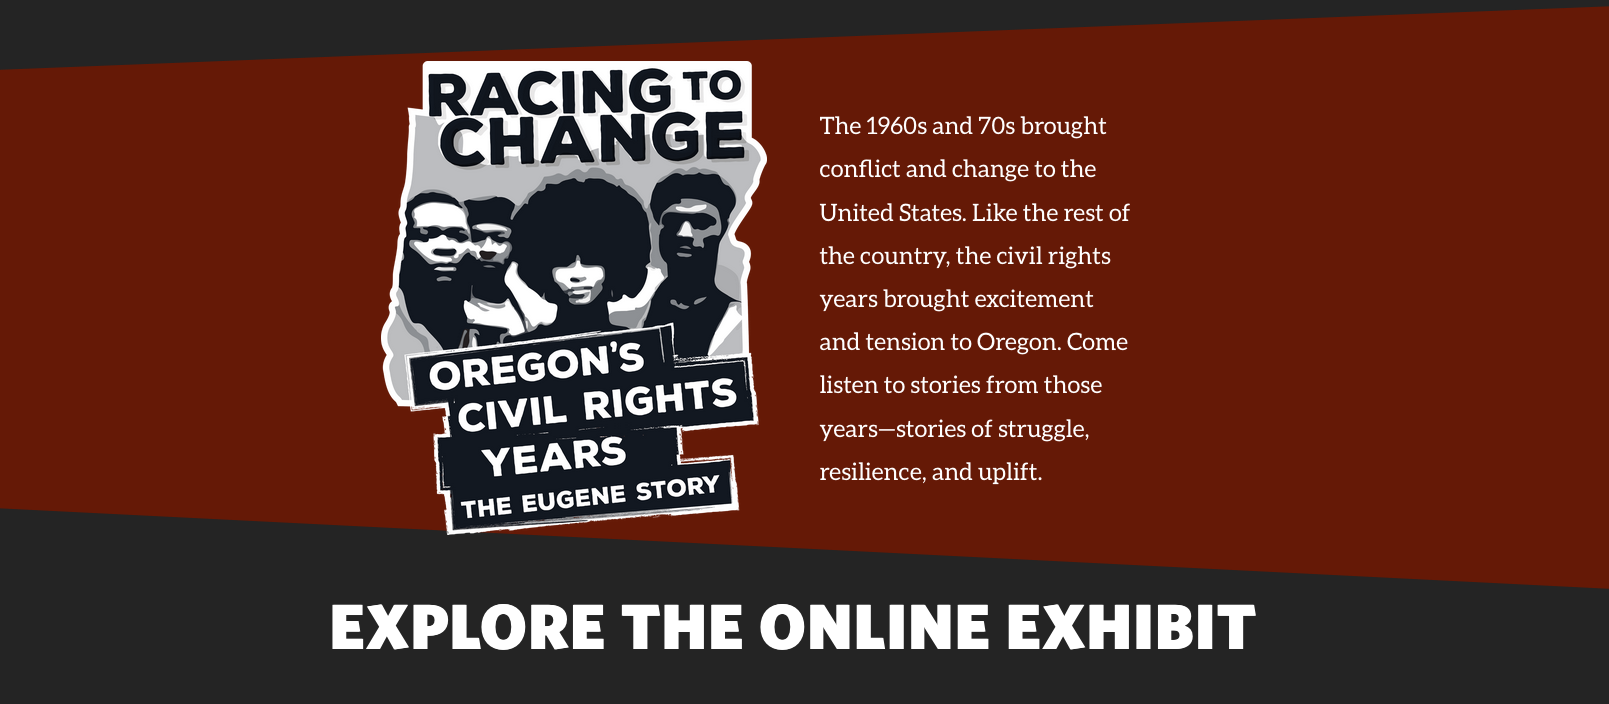 Racing to Change Oregon's Civil Rights Years The Eugene Story. The 1960s and 70s brought conflict and change to the United States. Like the rest of the country, the civil rights years brought excitement and tension to Oregon. Come listen to stories from those years--stories of struggle, resilience, and uplift.